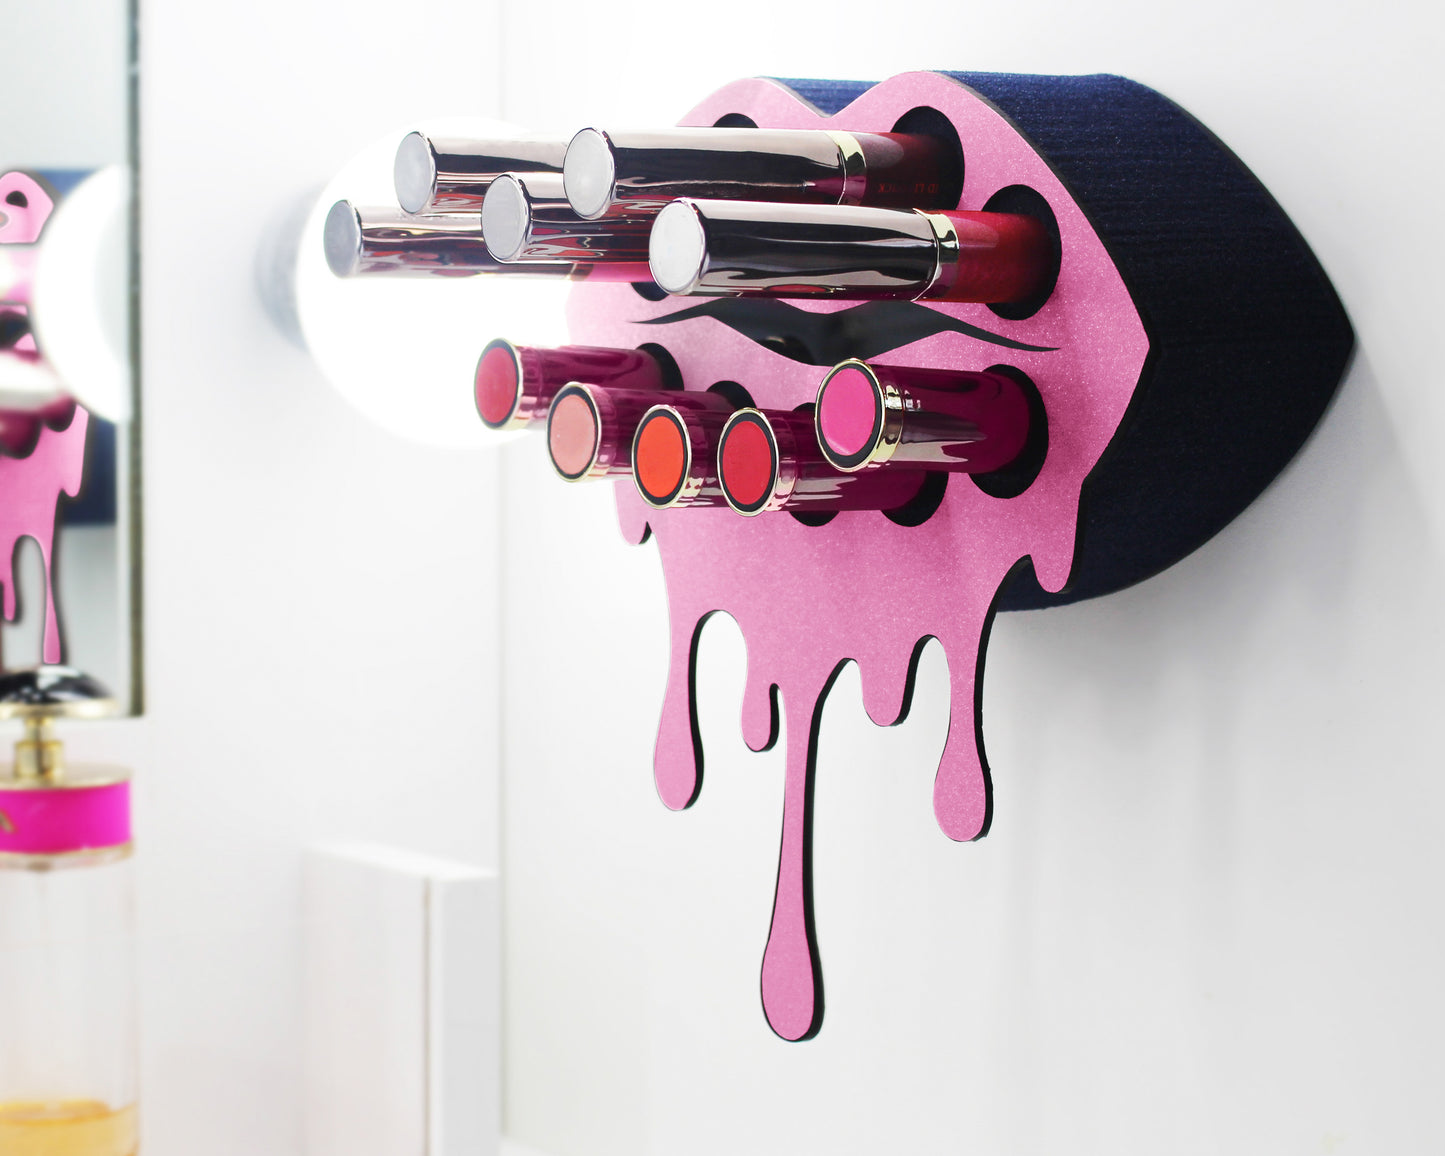 Light Pink Small Lip Design Lipstick Organizer holding 10 lipsticks mounted on the wall with lipstick easily accessible and organized. Hanging Lipstick Holder that looks like wall art.